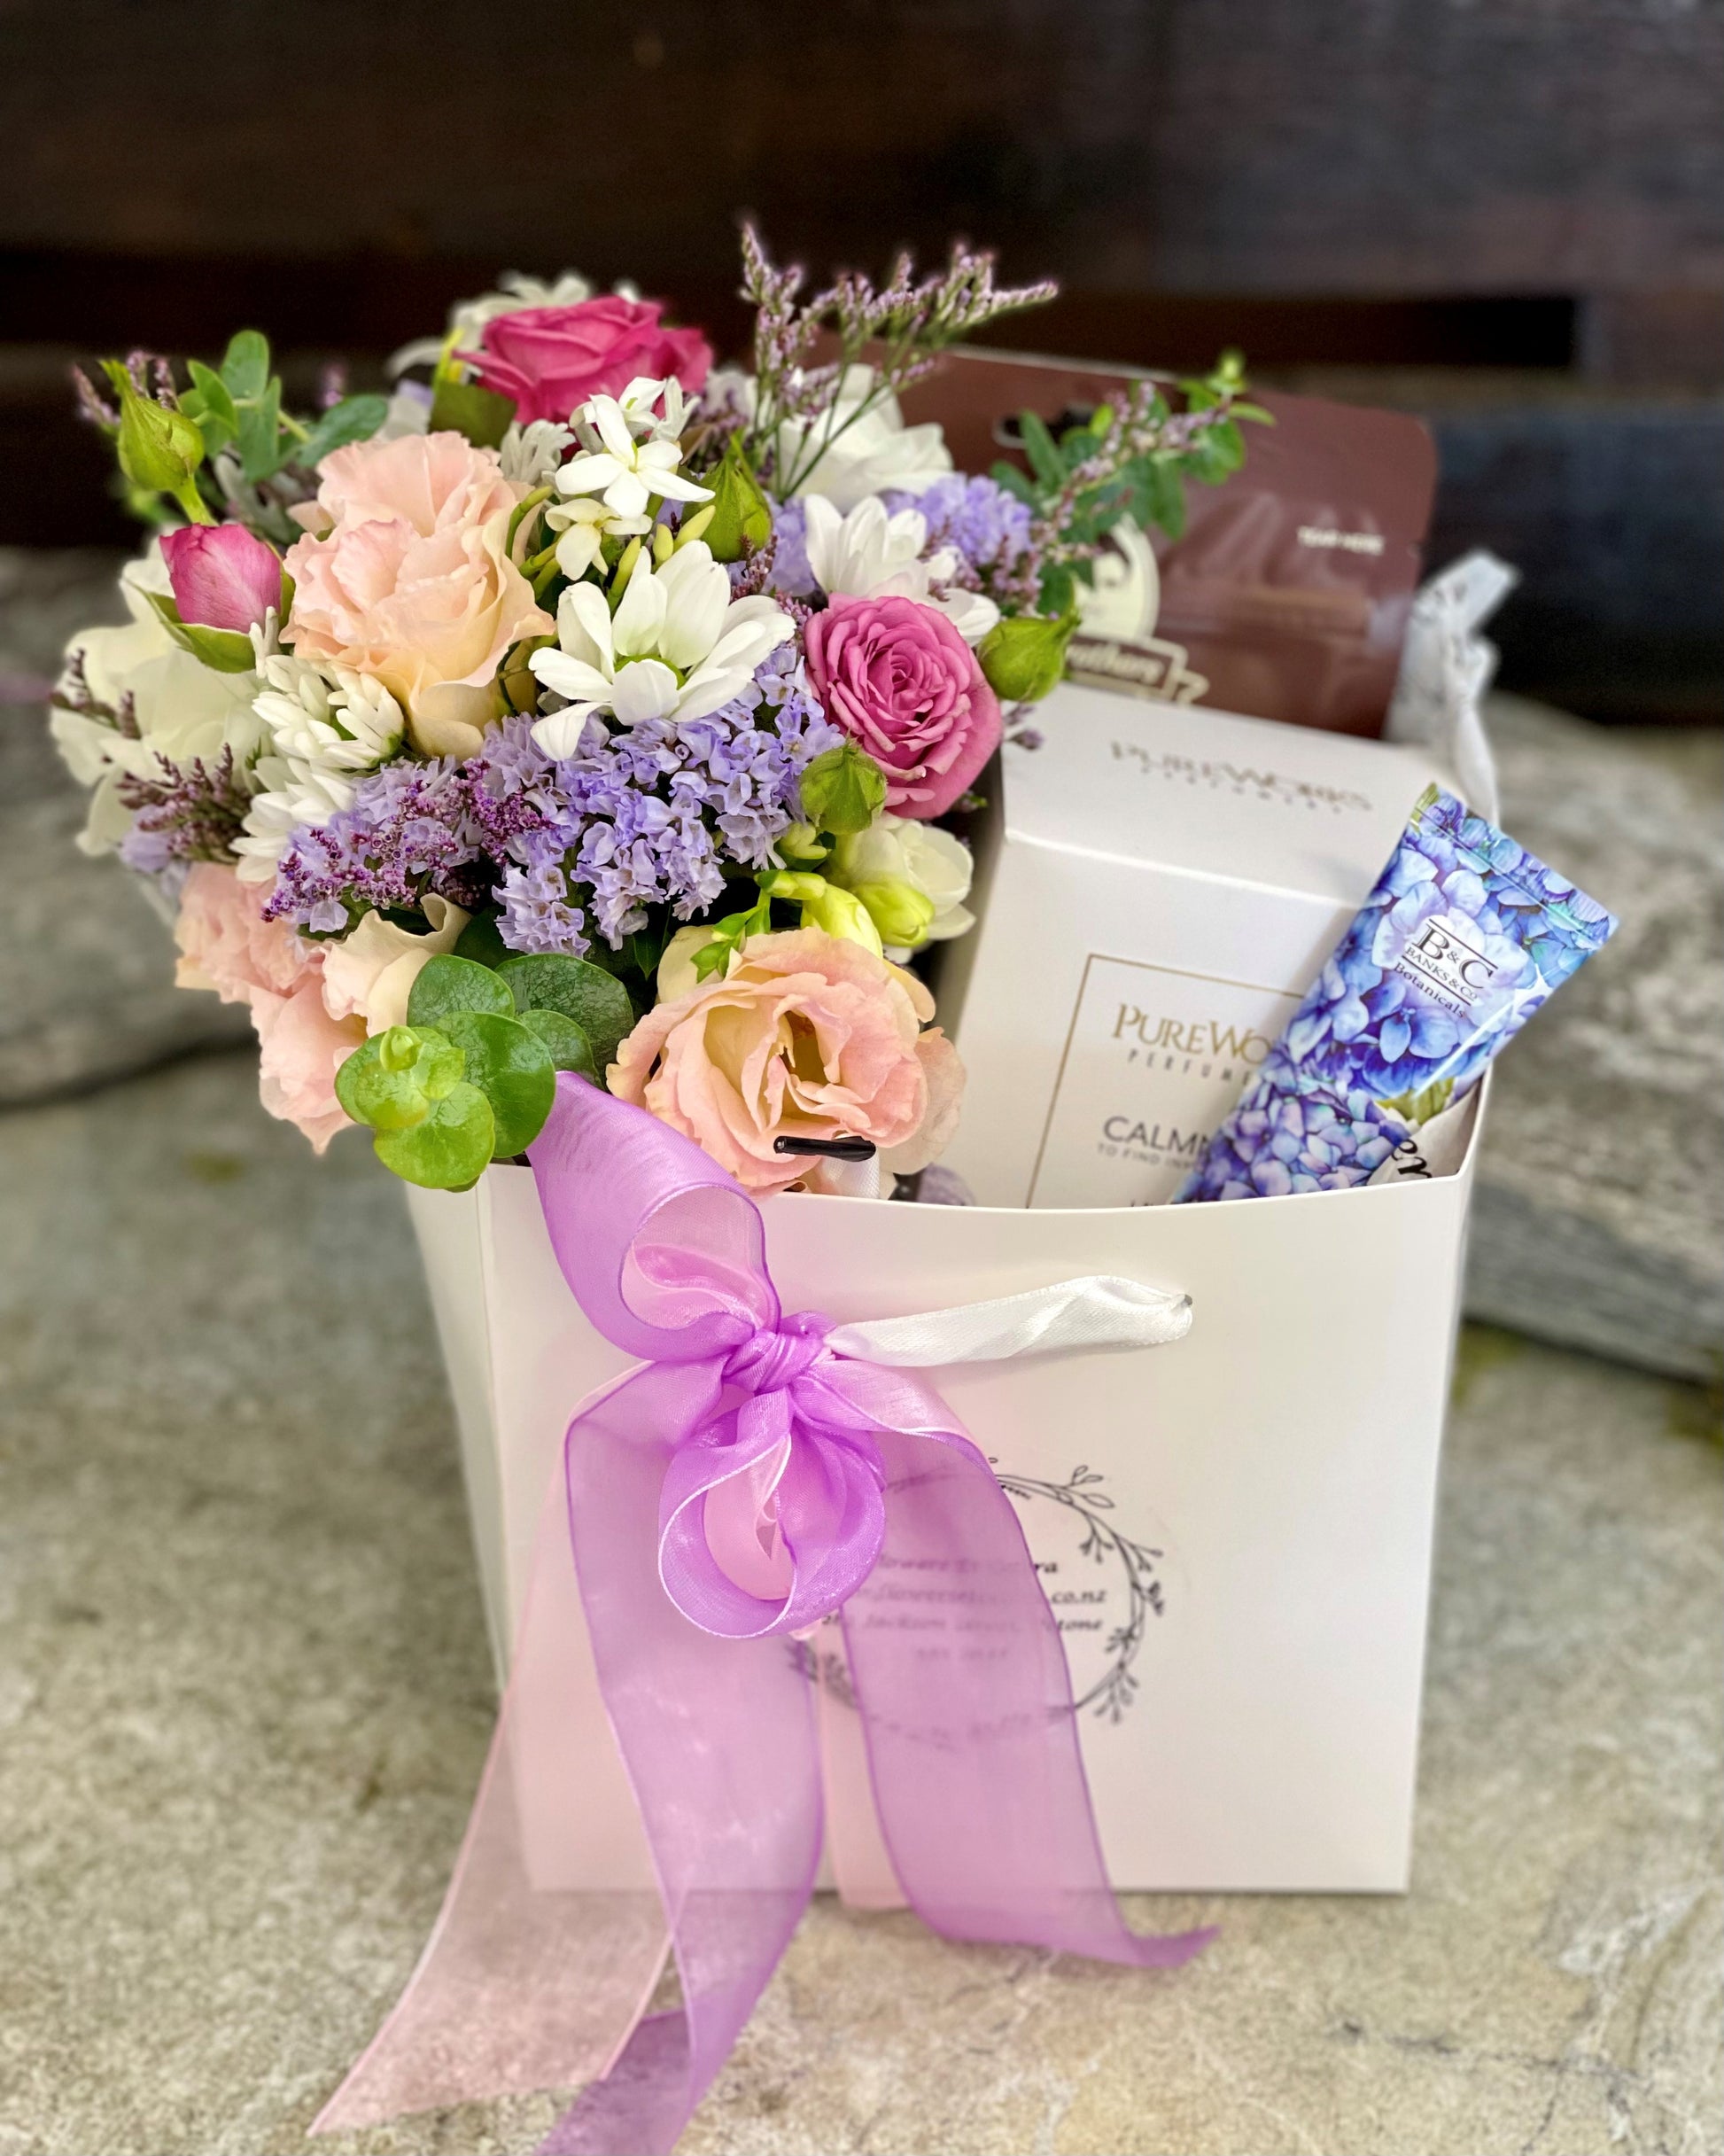 Flowersect, Floral, Bouquet, Flowers, Gifts, Posy, Posey, Wellington, Lower Hutt, Upper Hutt, Petone, Eastbourne, Bright, Pastel, Florist, Florists, Creative, Flair, custom, bespoke, bunch, bunches, scent, gift bag,